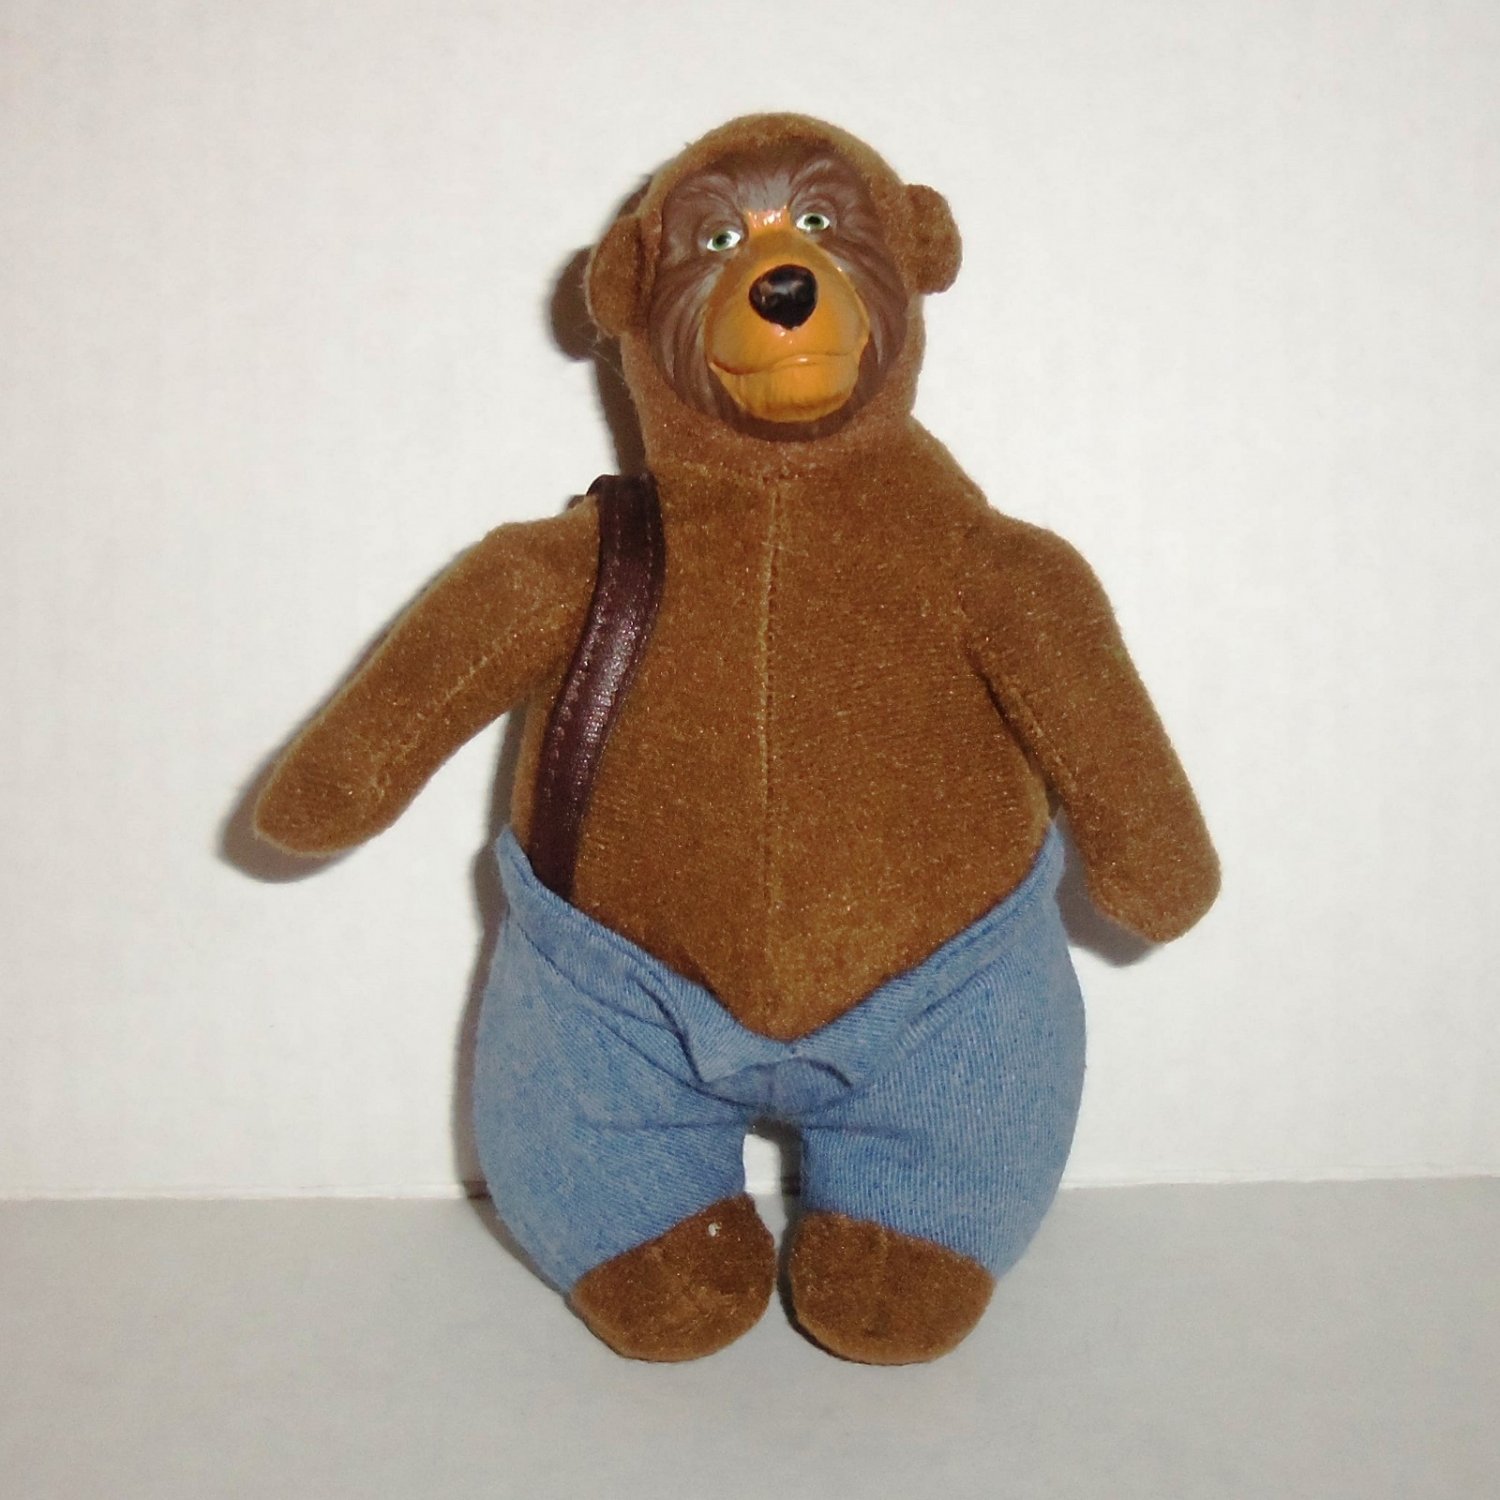 2001-2002 Disney's The Country Bears McDonalds Toy Fred Bedderhead #8